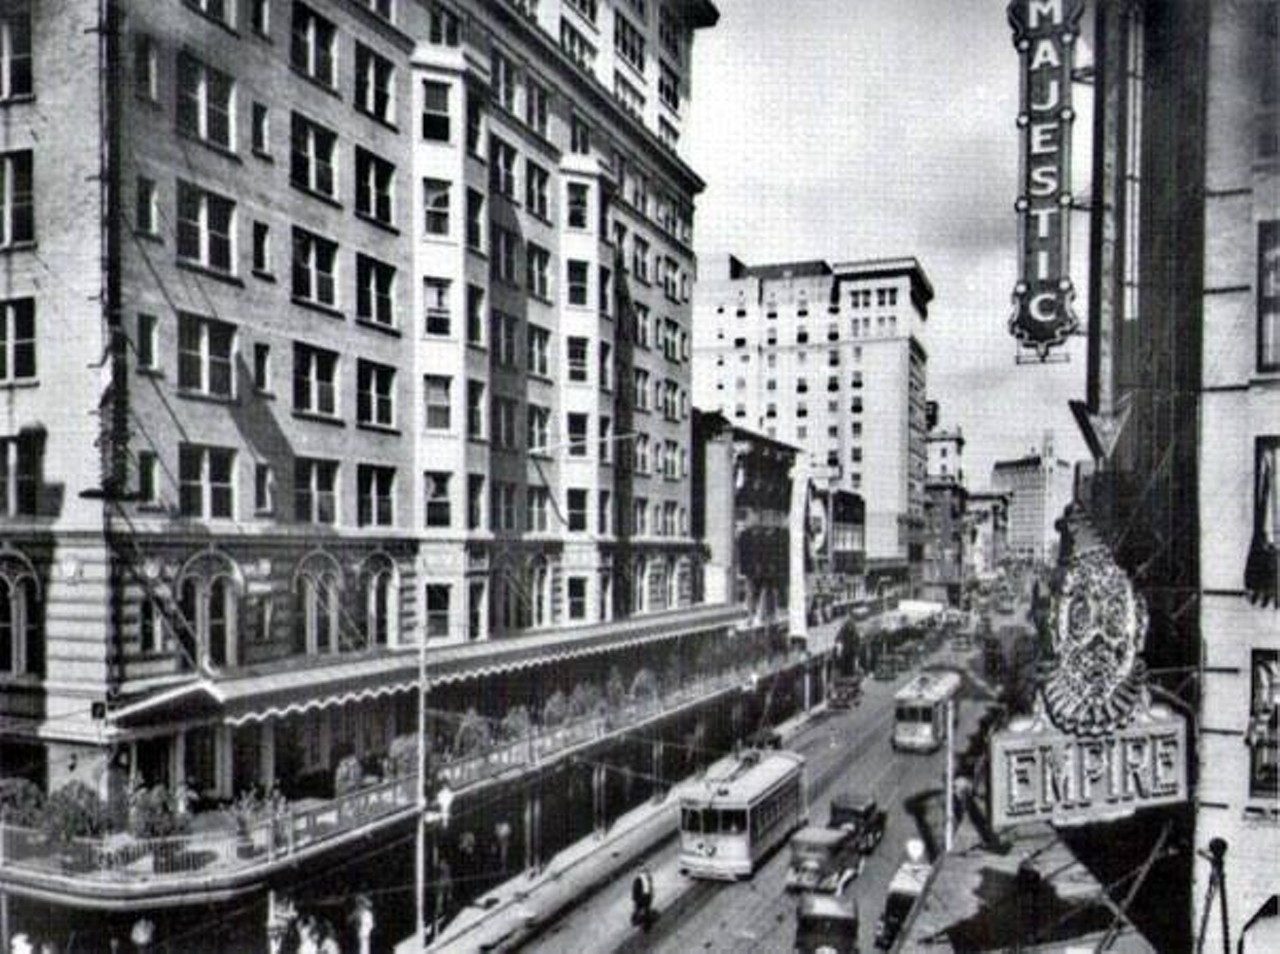 Late 1920s, Houston Street looking east from St. Mary's Street, with the Gunter Hotel on the left and the Majestic & Empire Theater on the right.